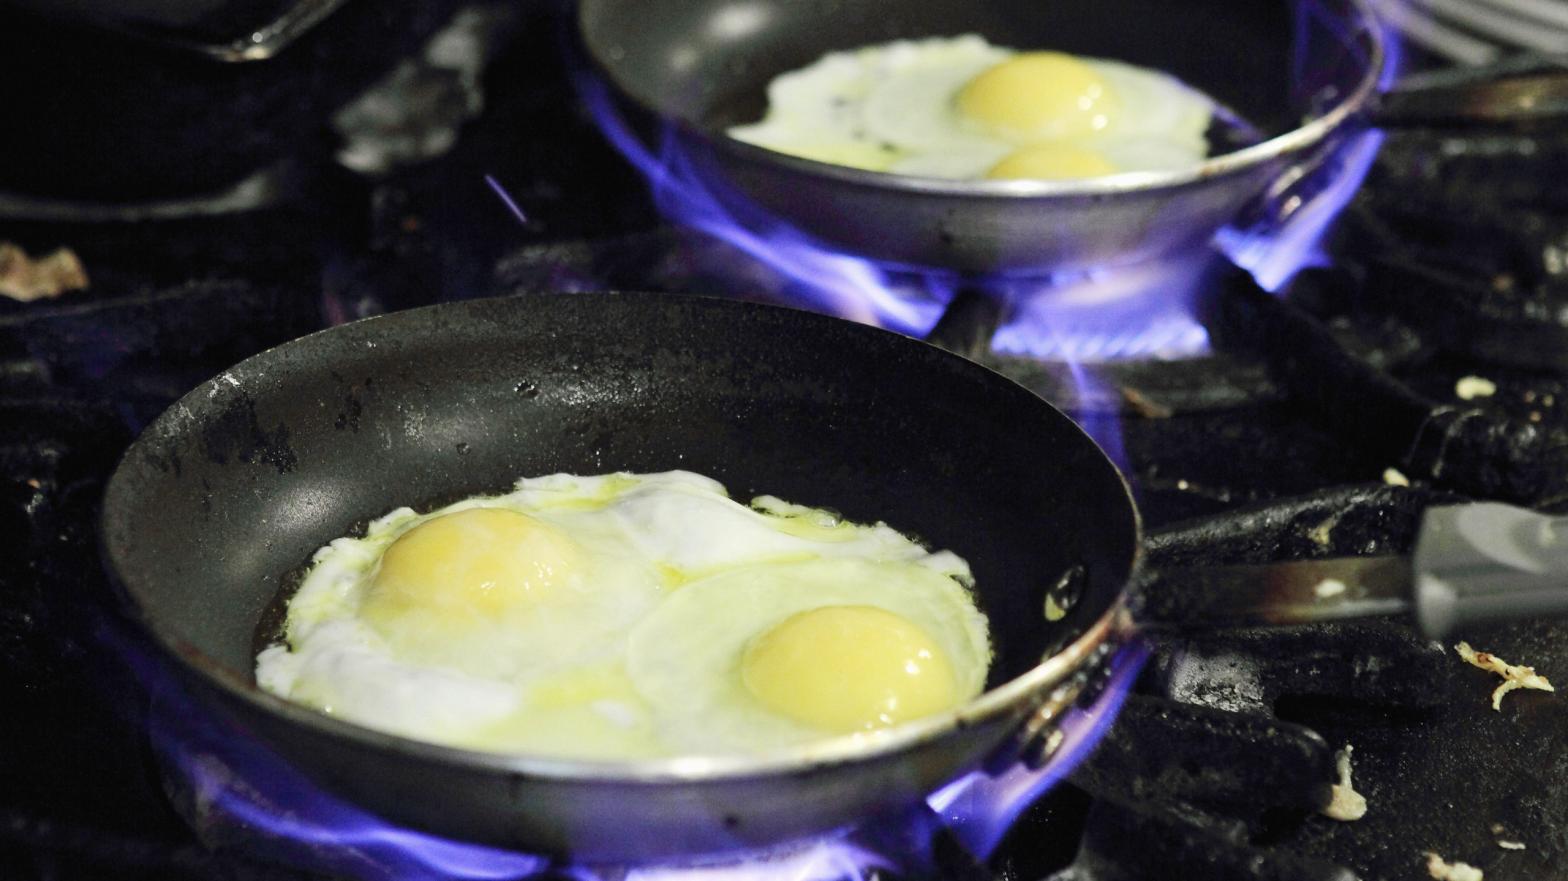 Eggs cooking in a nonstick pan, with a side of endocrine disruption. (Photo: Justin Sullivan, Getty Images)